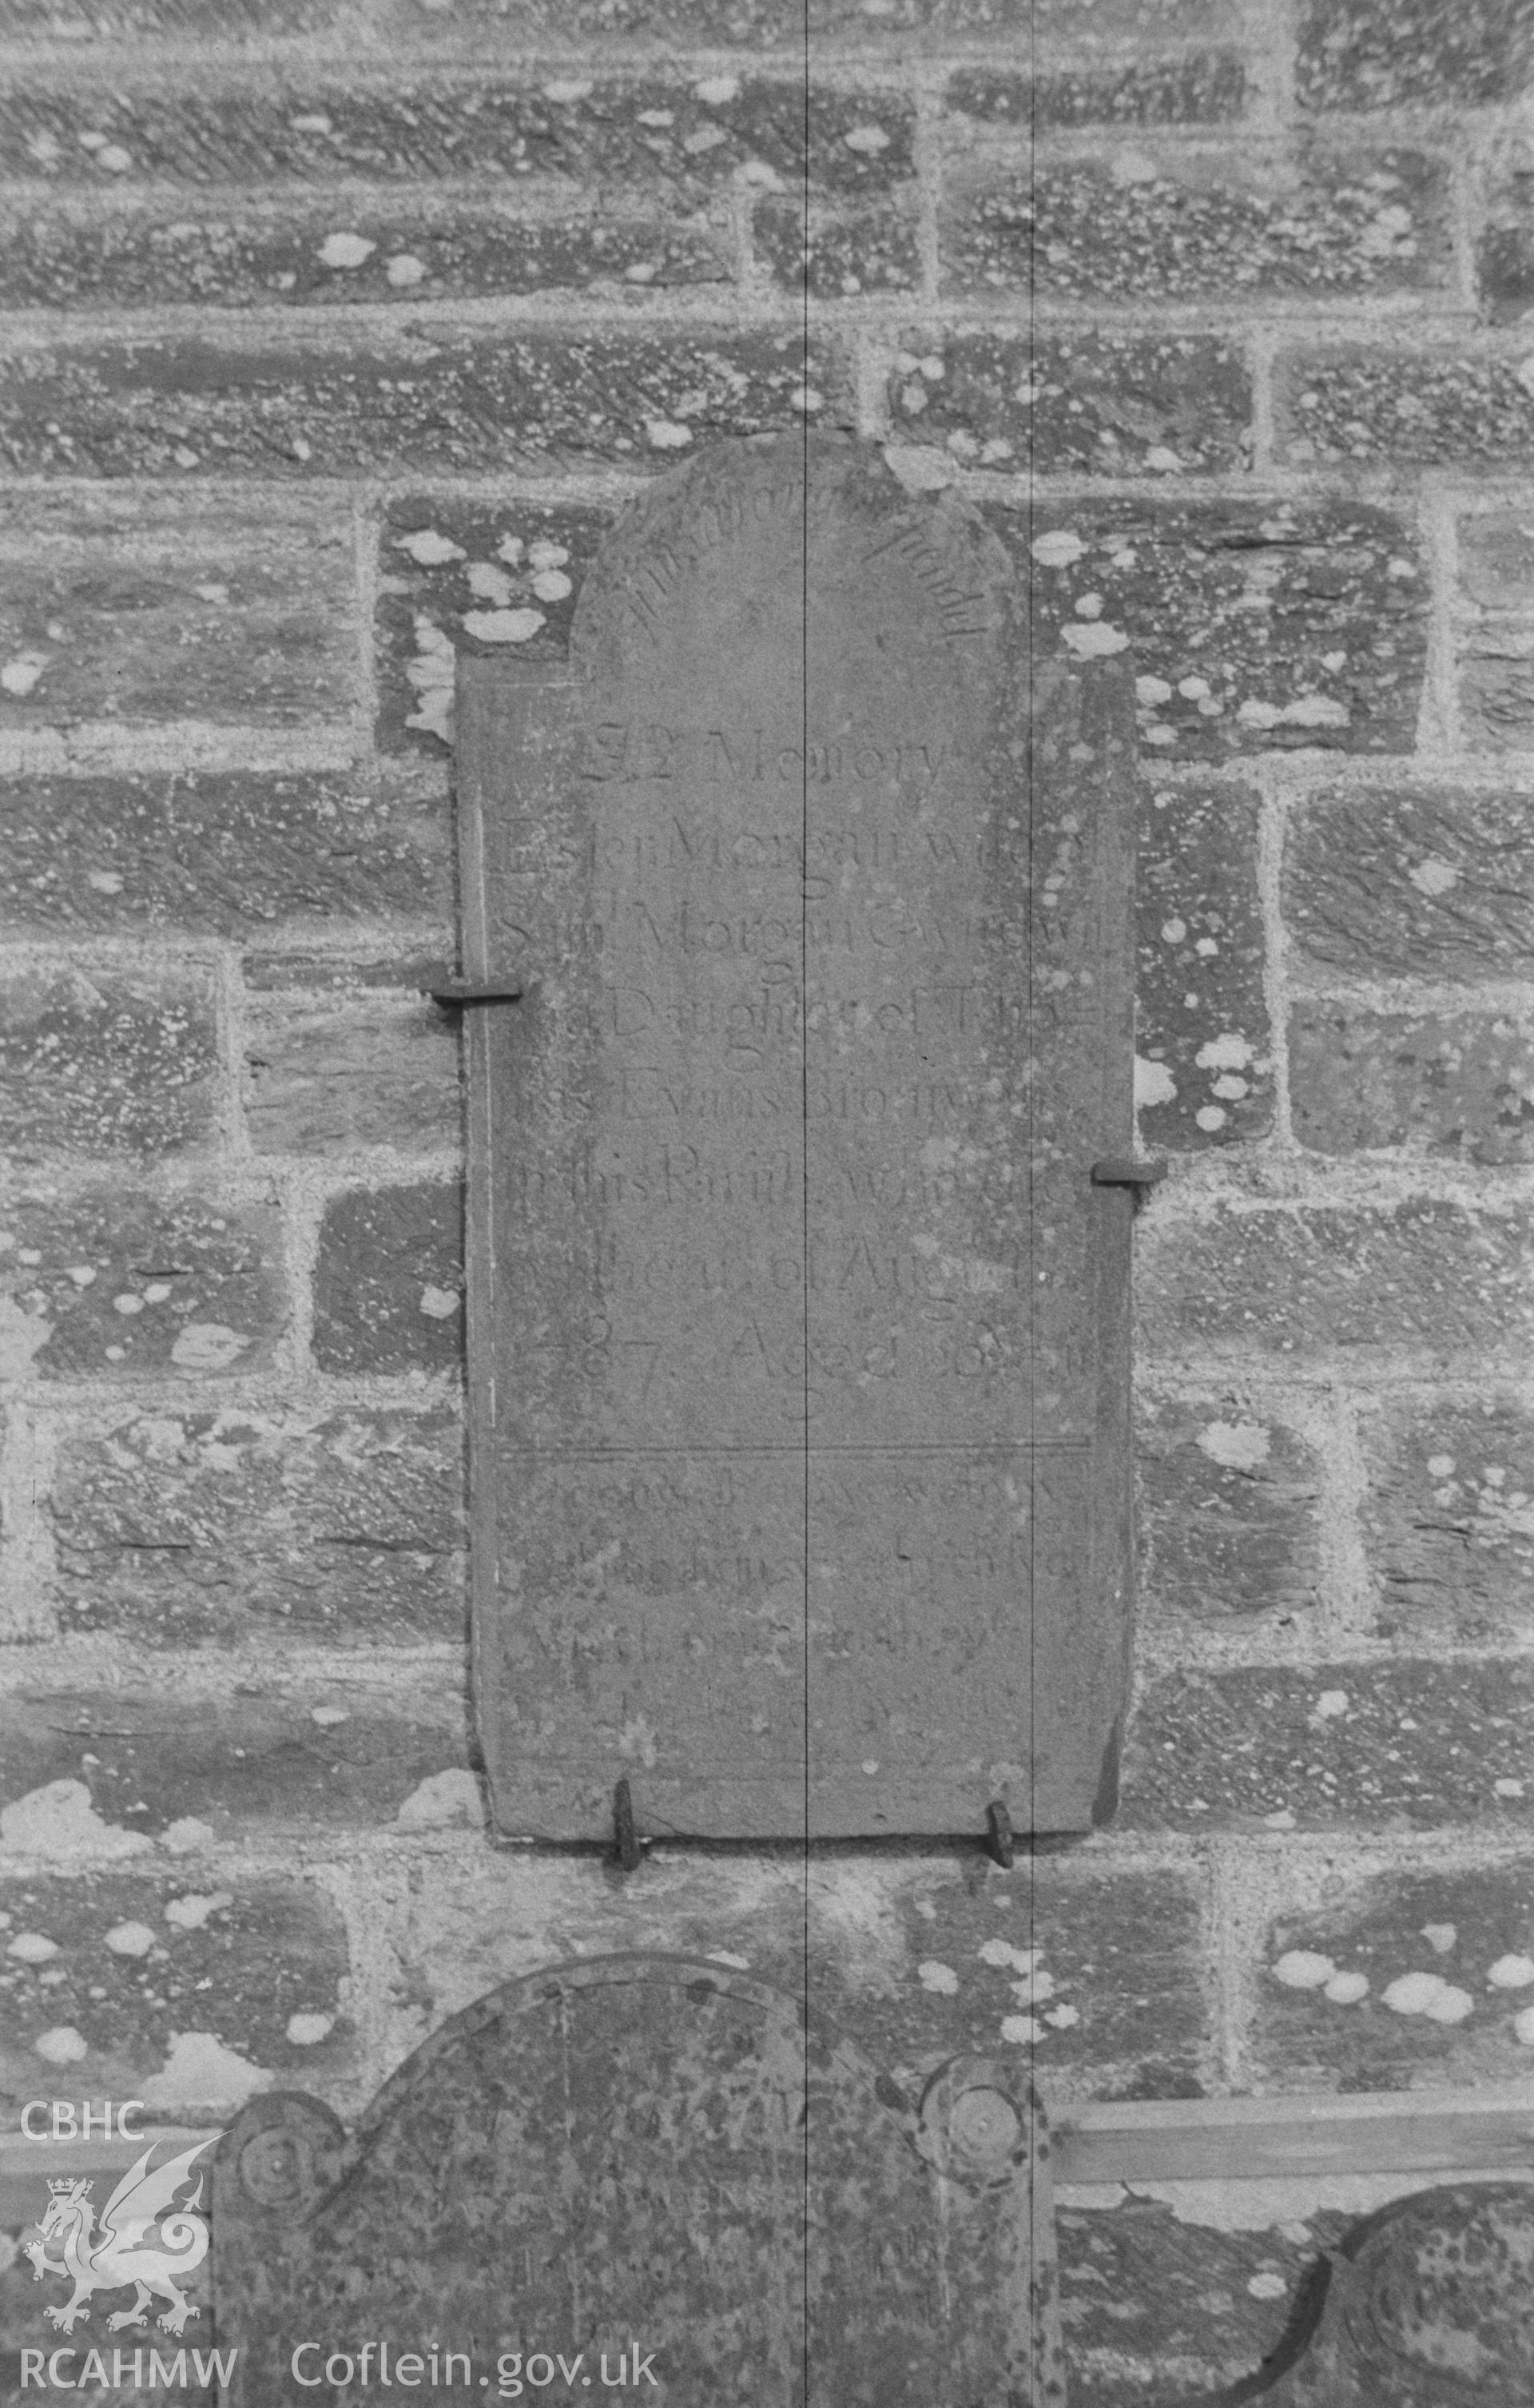 Digital copy of a black and white negative showing tombstone fixed on outer west wall of St Michael's Church, Troedyraur, east of Cardigan. Photographed in April 1963 by Arthur O. Chater from Grid Reference SN 3270 4537, looking east.